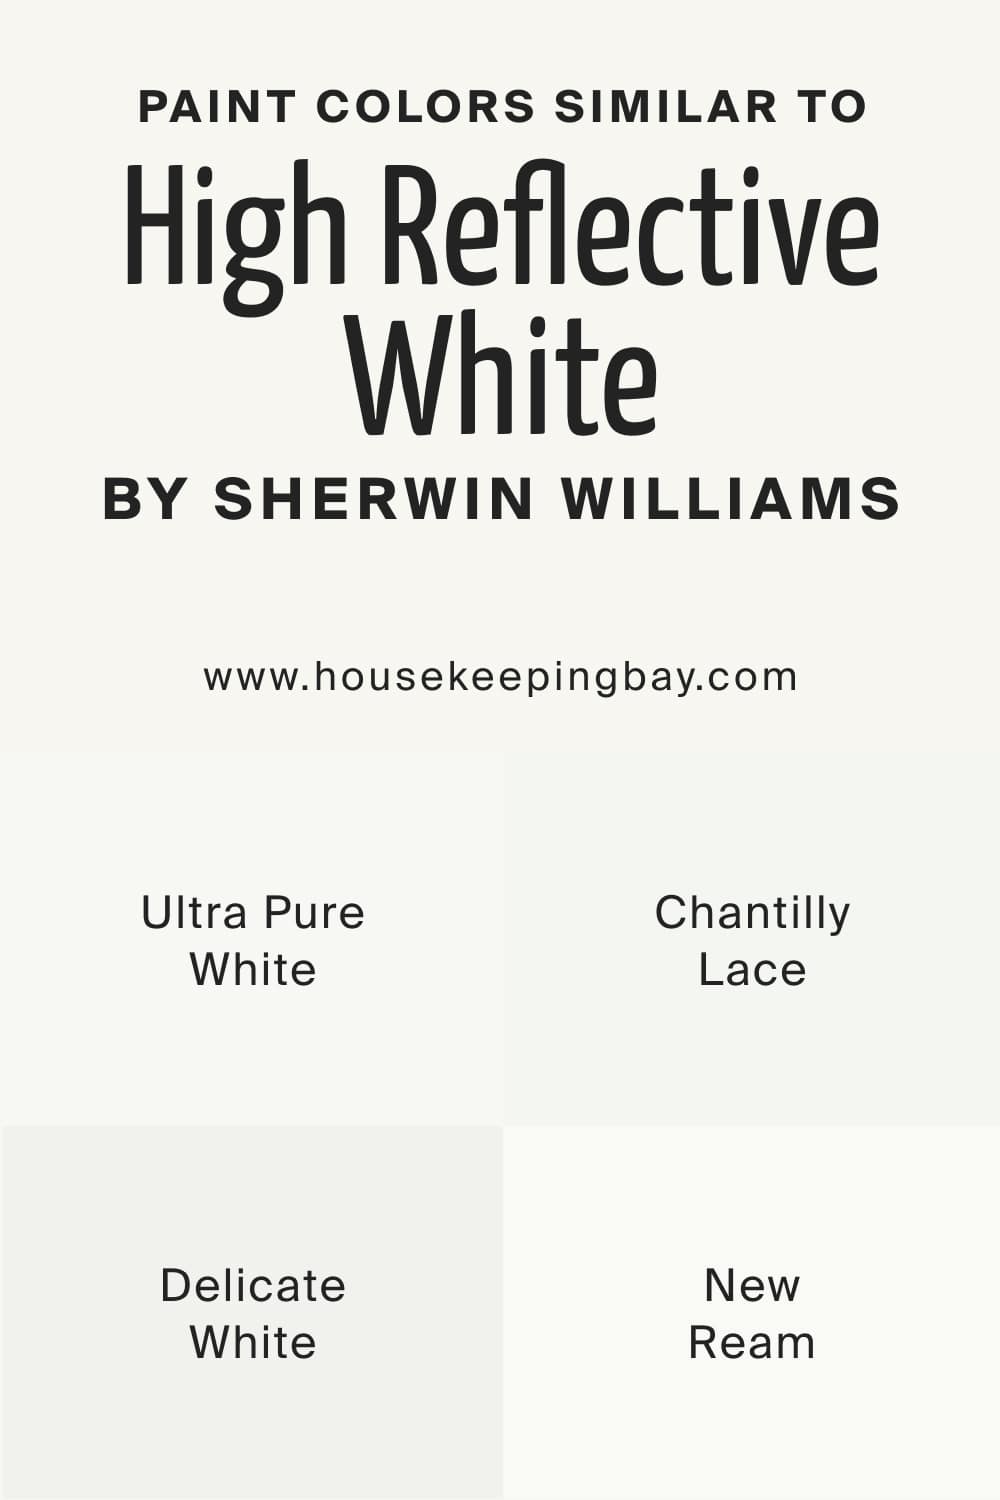 Paint Colors Similar to High Reflective White SW 7757 by Sherwin Williams